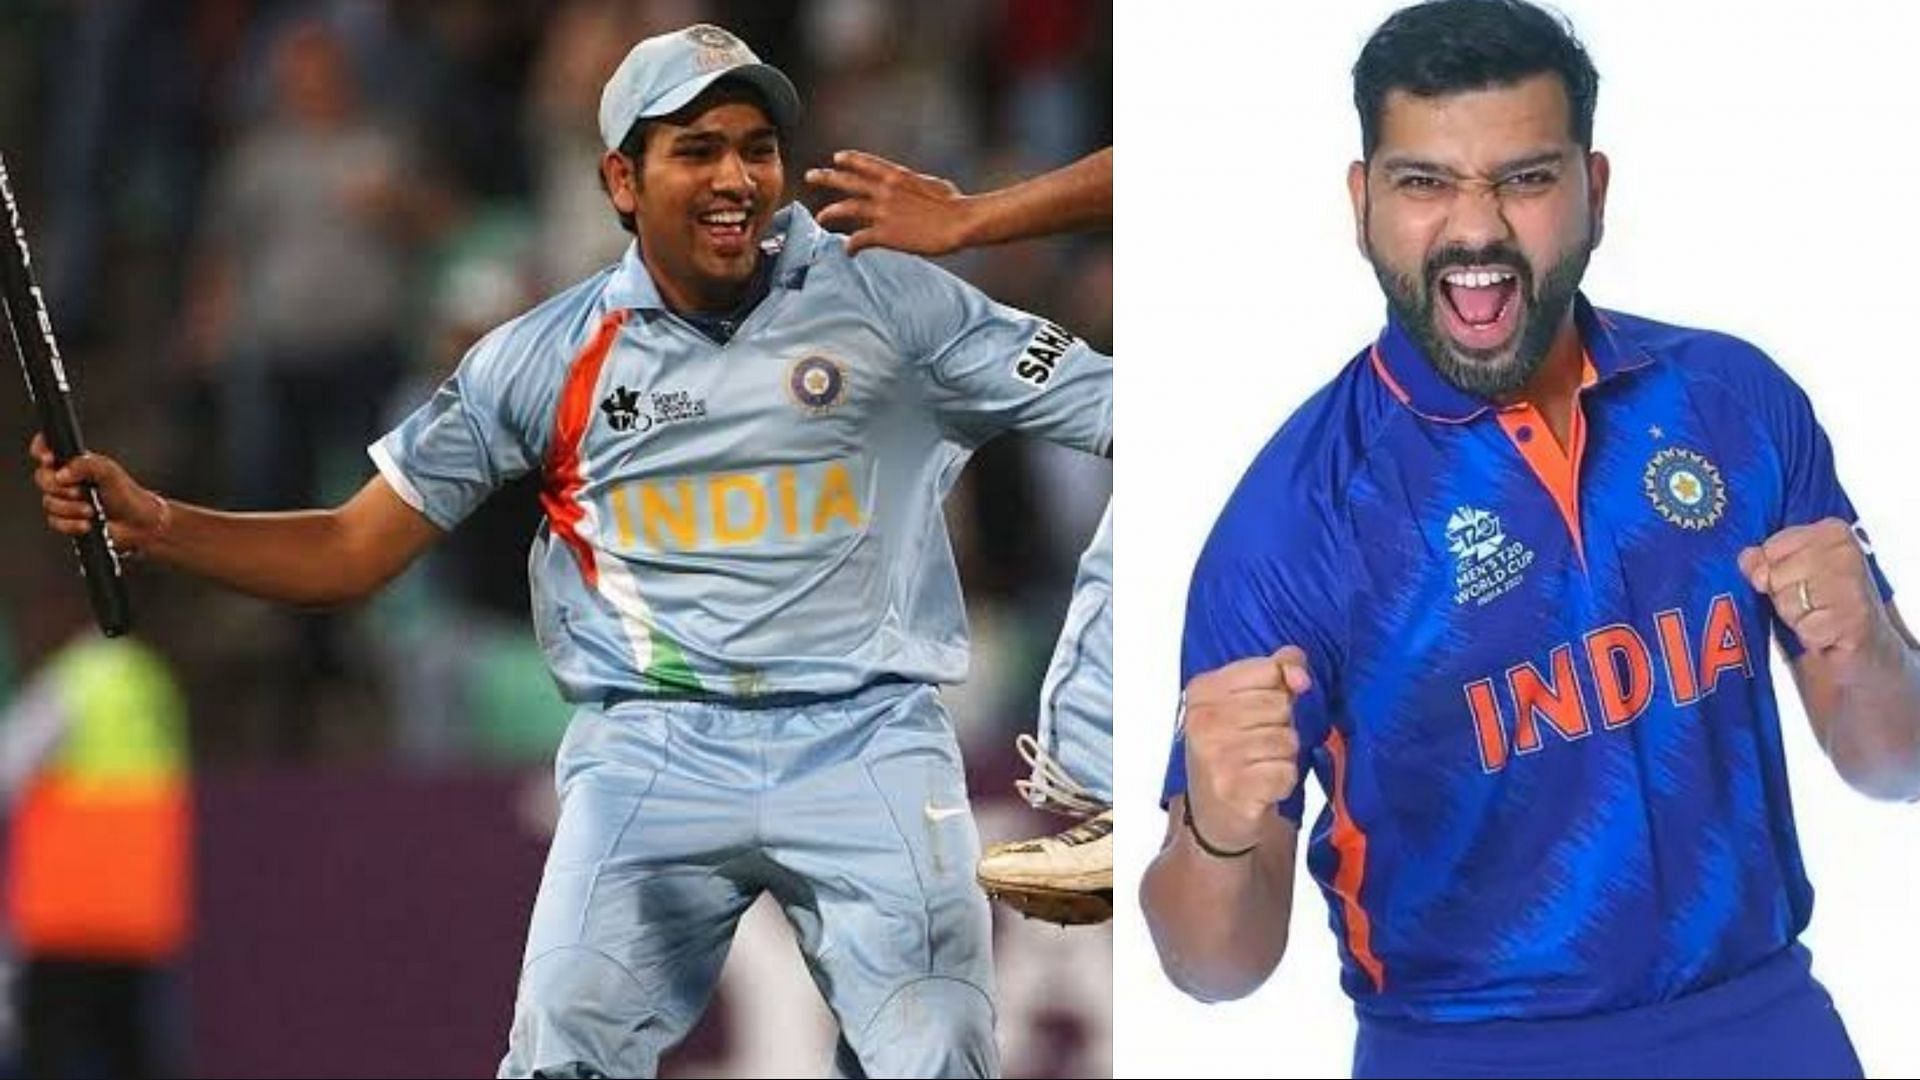 Rohit Sharma was a part of the Indian playing XI in the inaugural T20 World Cup